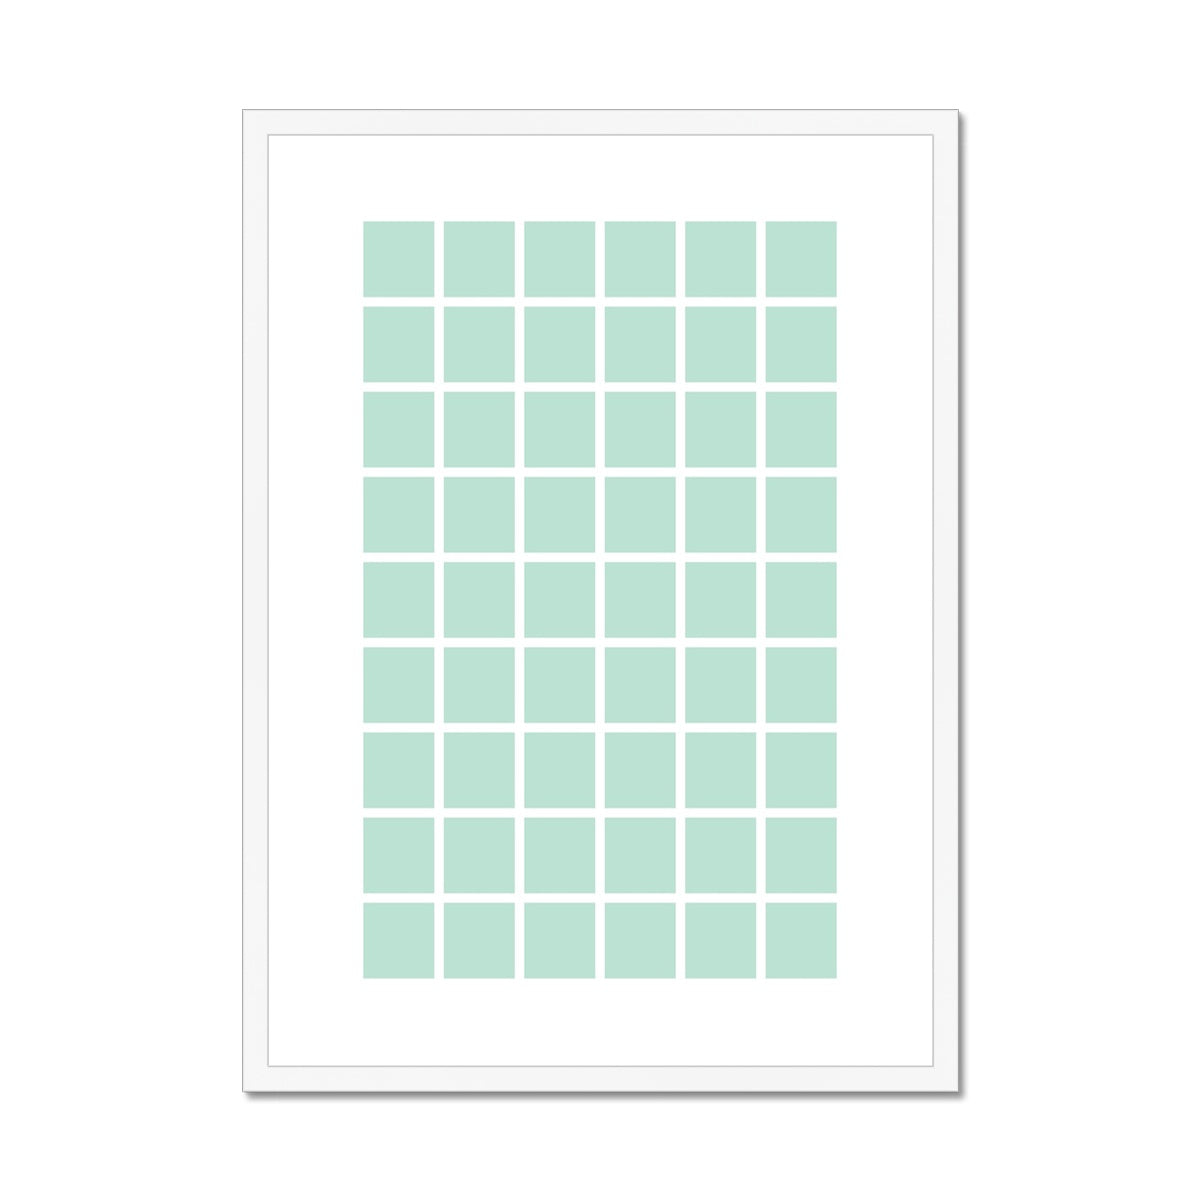 Dempsters Blue  Blocks - wrong Framed & Mounted Print